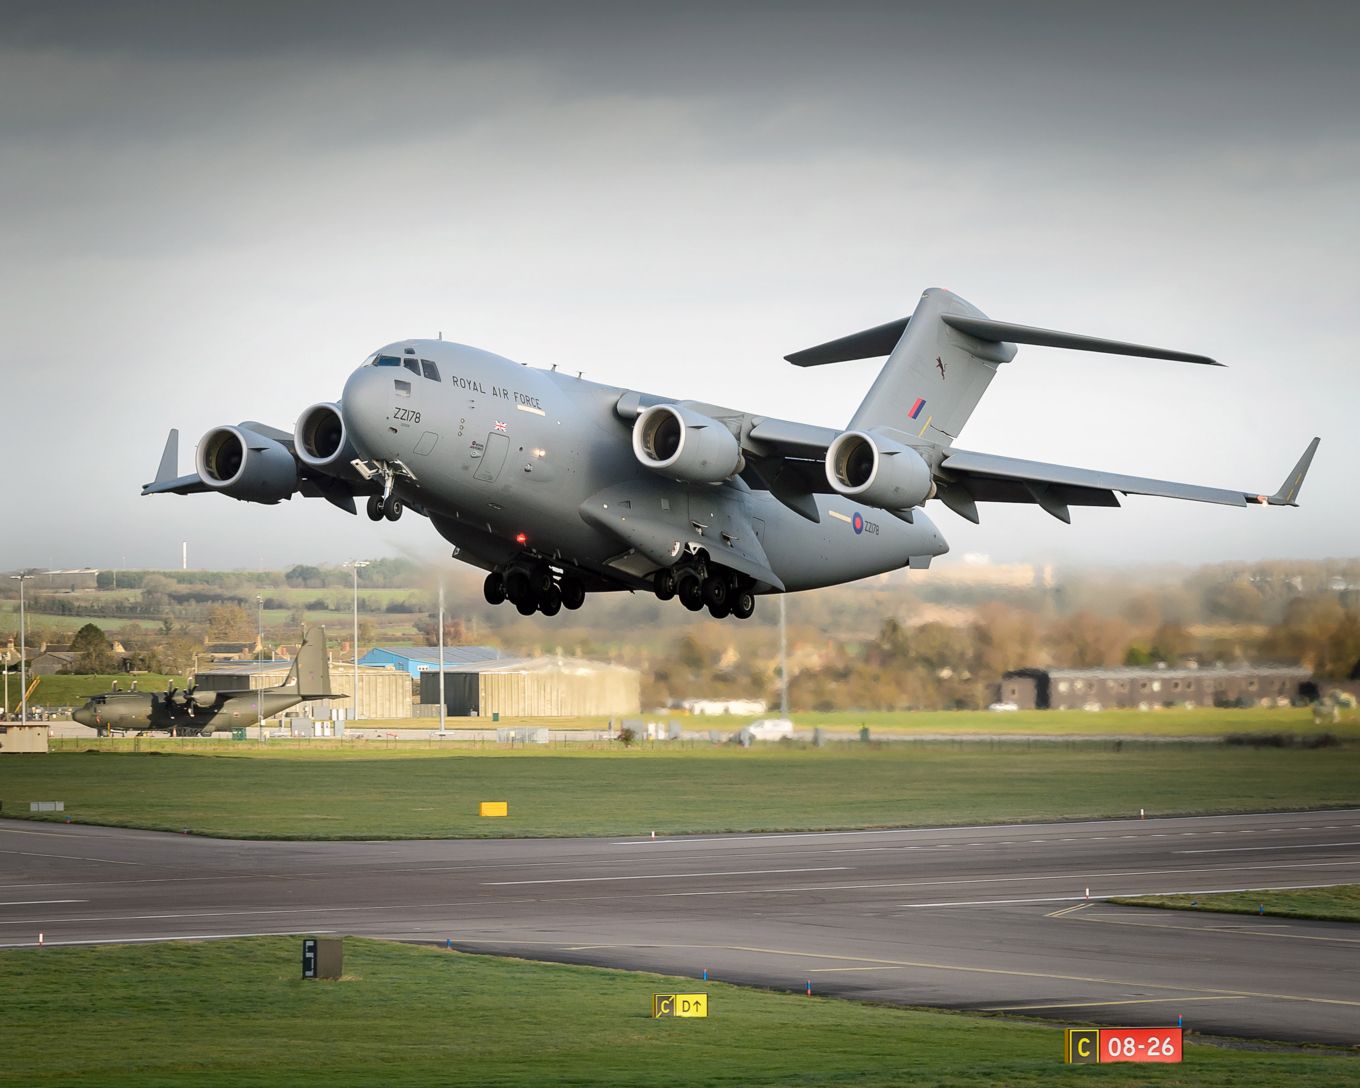 Image shows an RAF C-17 aircraft taking off.